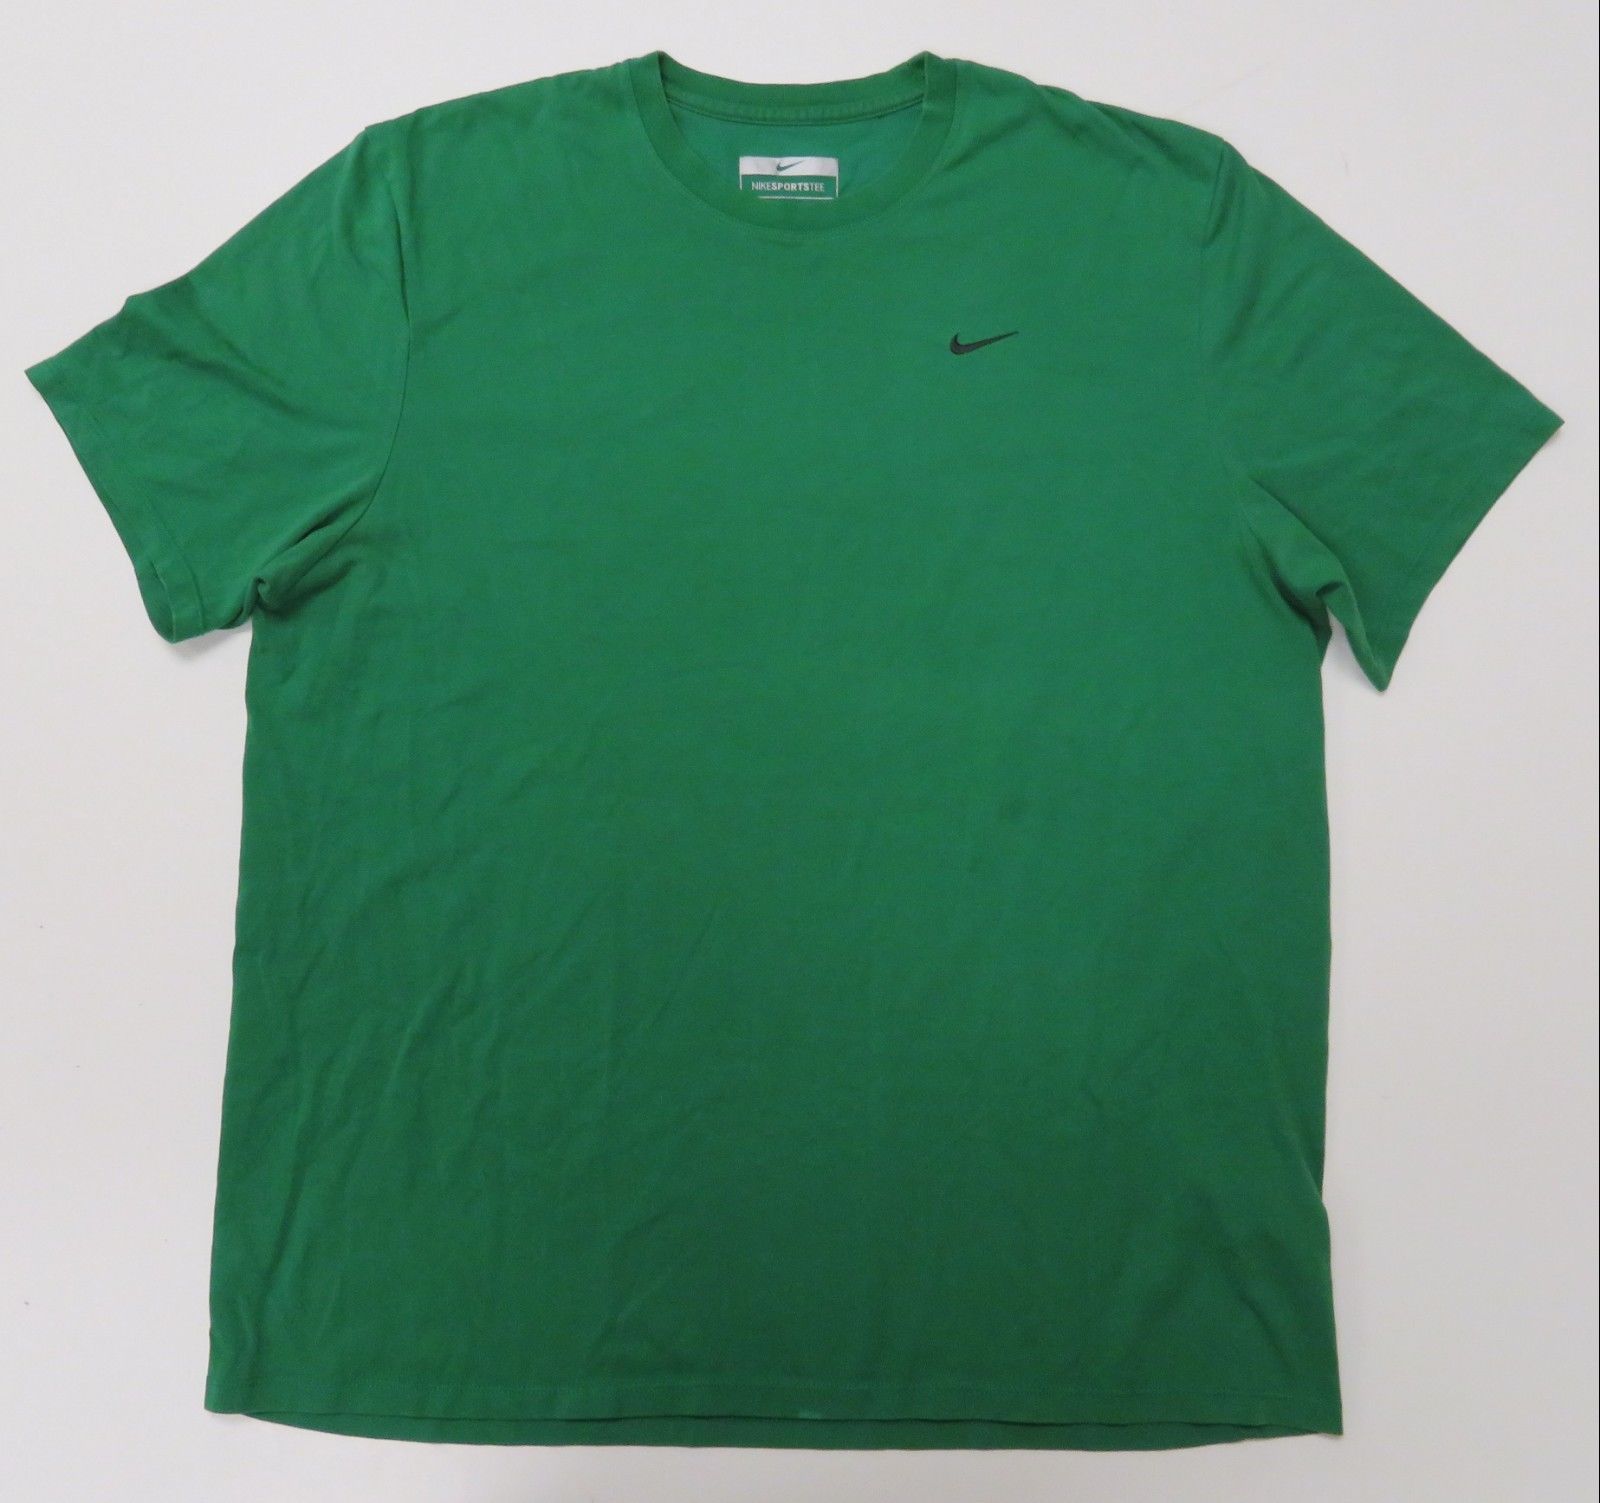 Nike Fit Dry Mens XL Green Sport Tee T-Shirt Crew Neck Cotton Poly ...